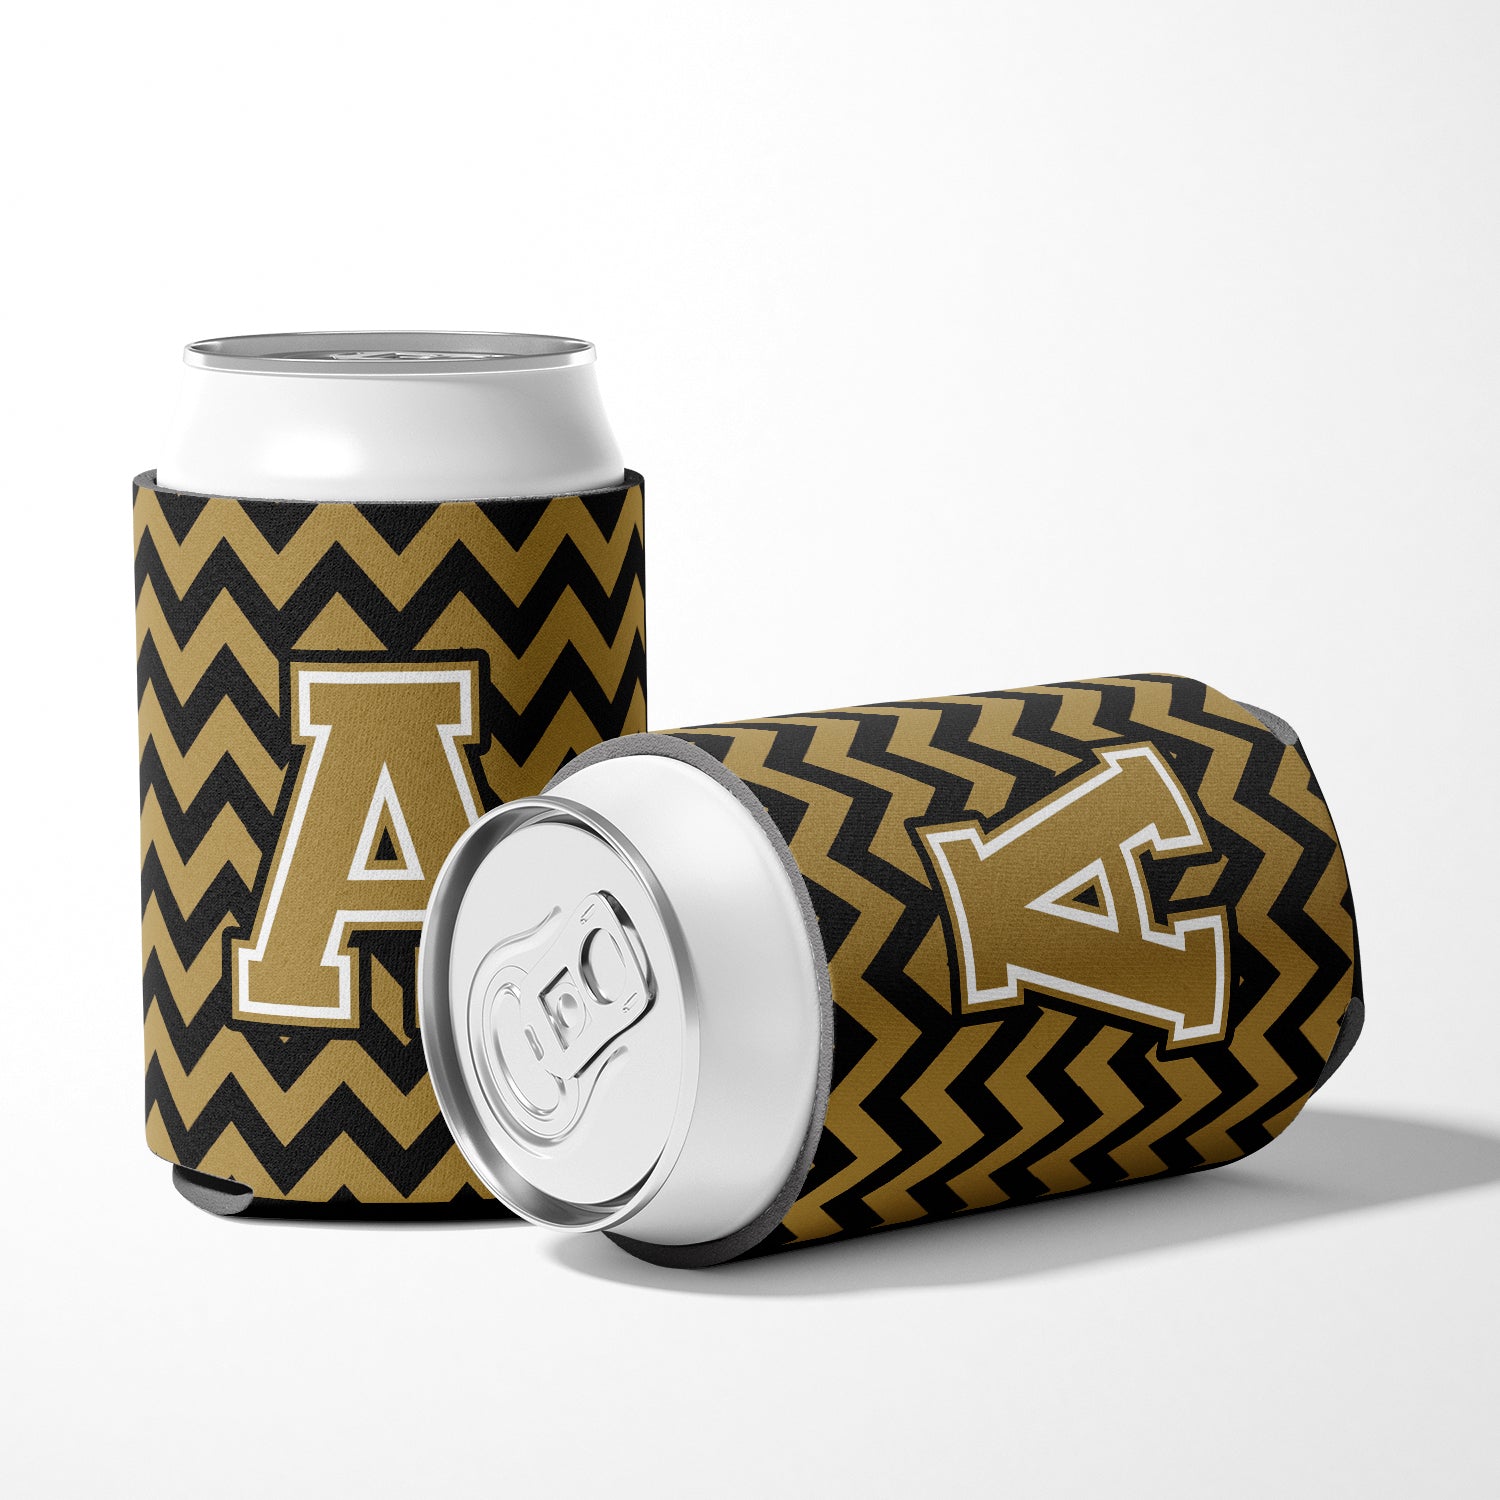 Letter A Chevron Black and Gold  Can or Bottle Hugger CJ1050-ACC